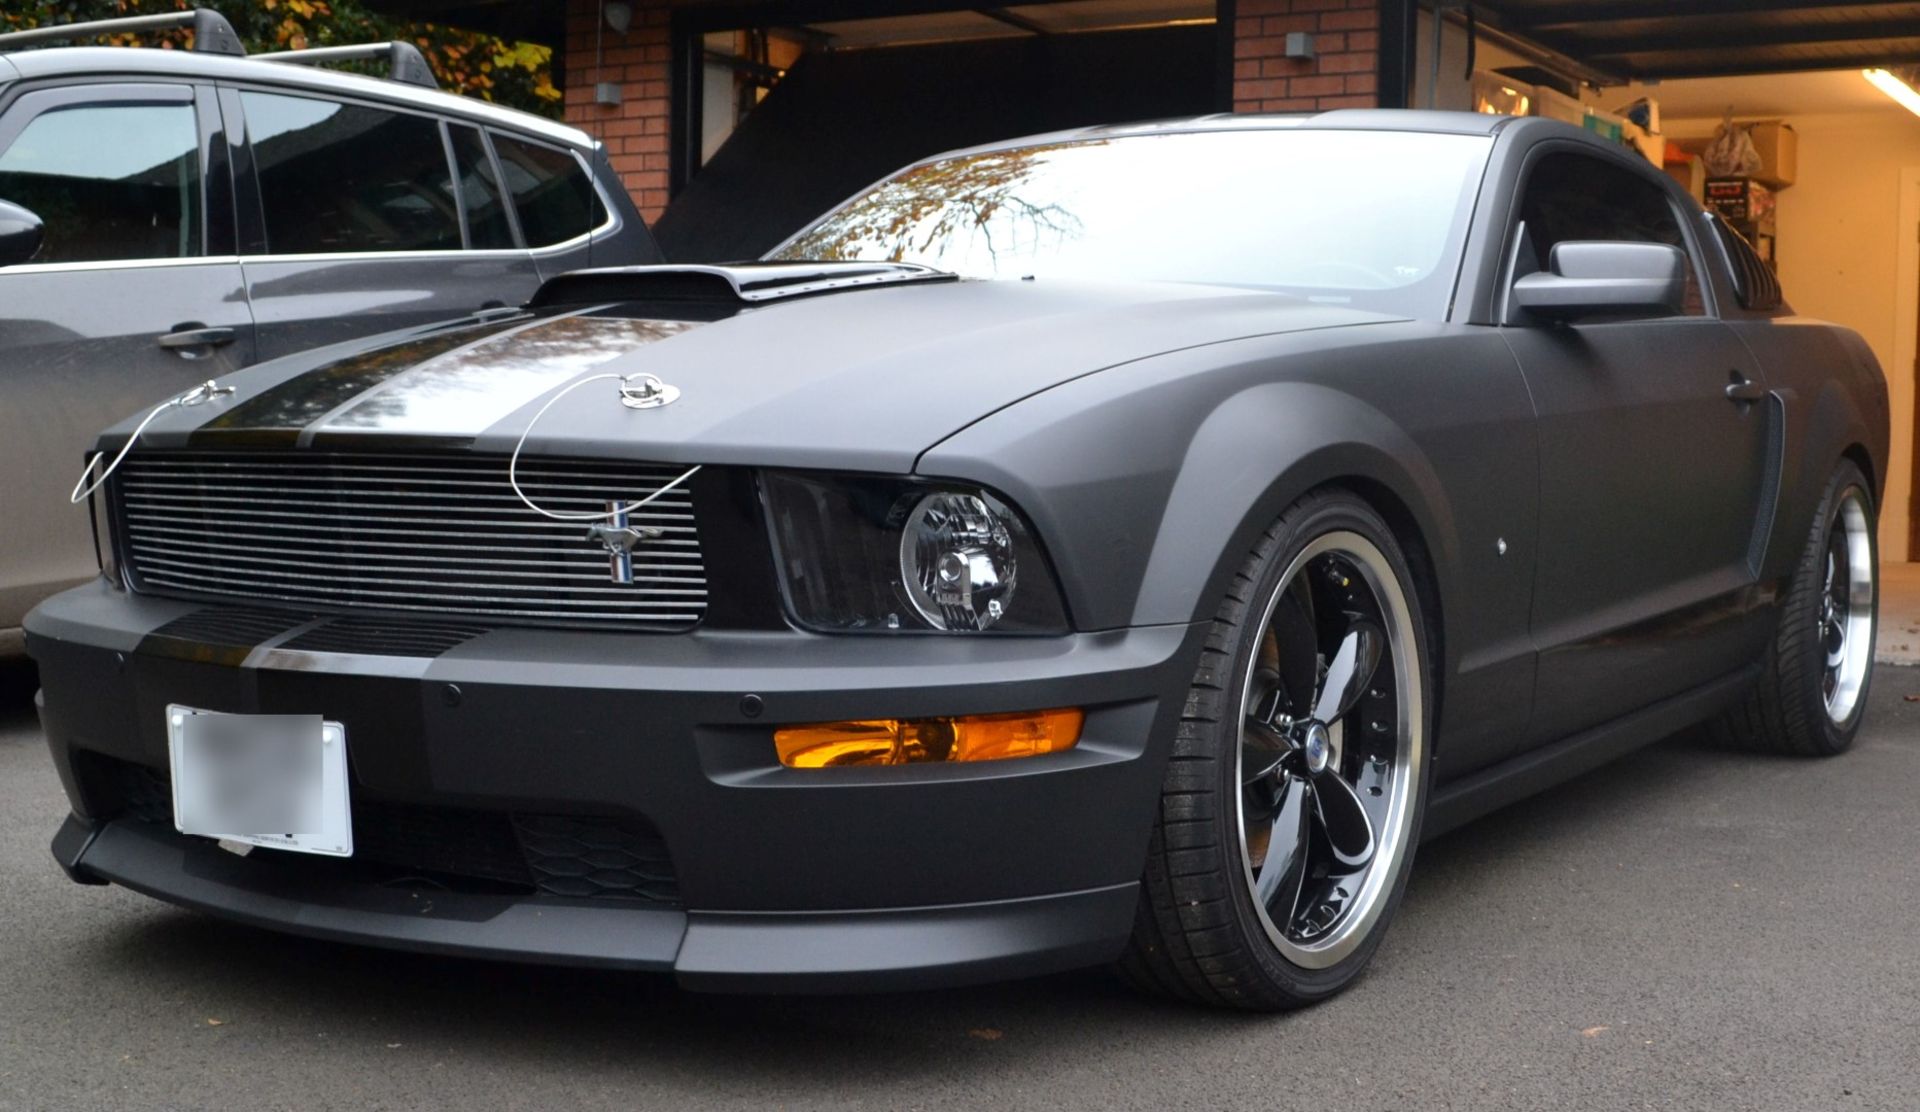 Limited Edition Supercharged 2008 Shelby Ford Mustang GT-C - 2136 Miles - No VAT on the hammer - Image 17 of 64